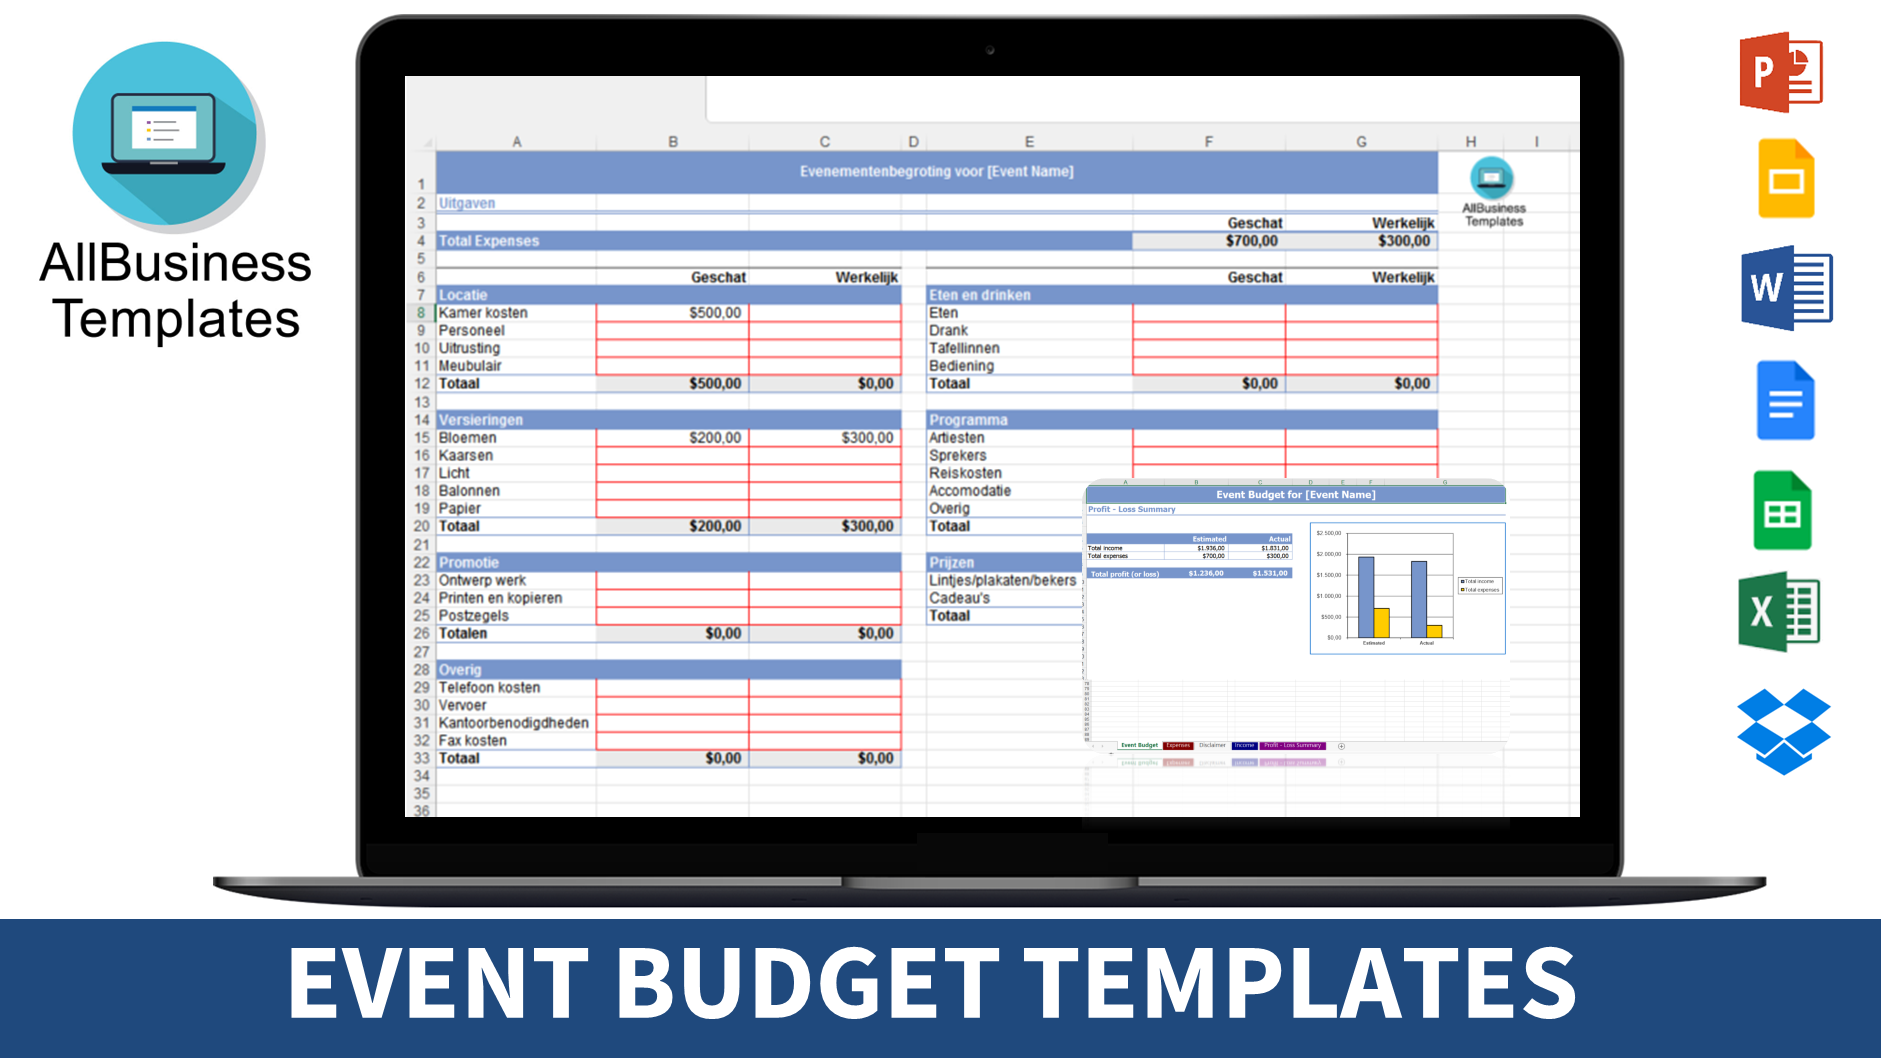 conference event budget template